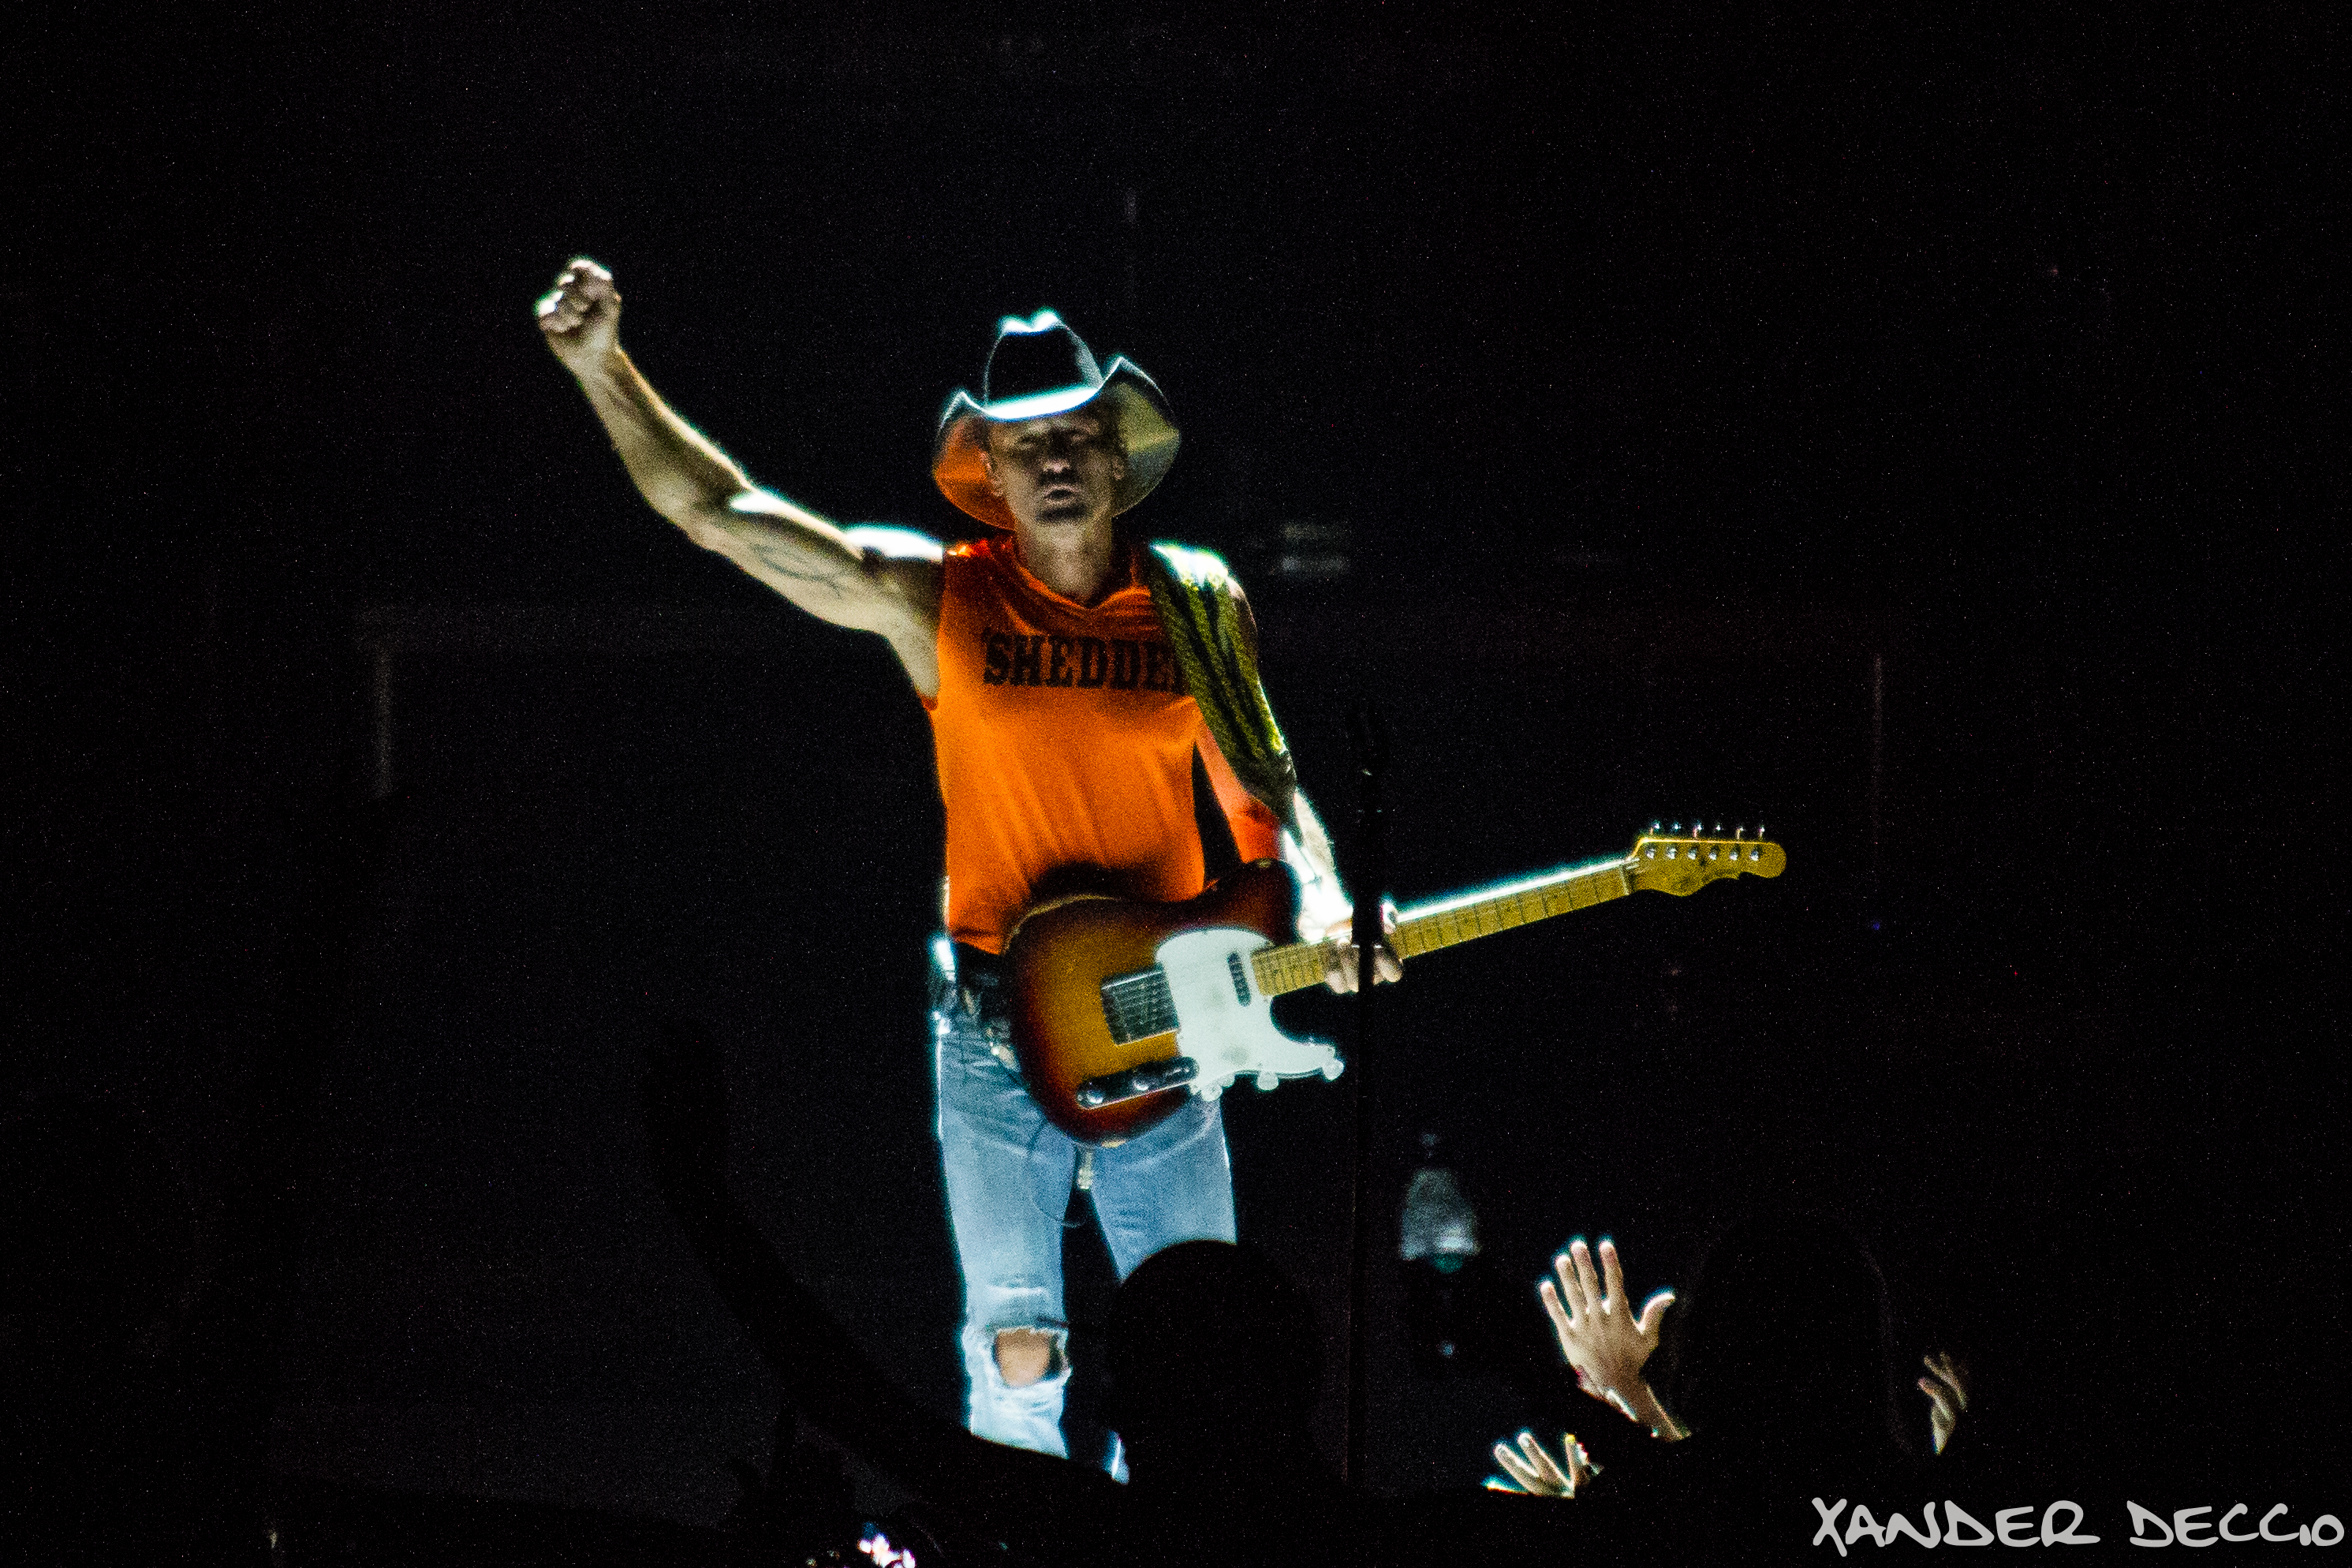 Tim McGraw at Watershed 2014 (Photo by Xander Deccio)